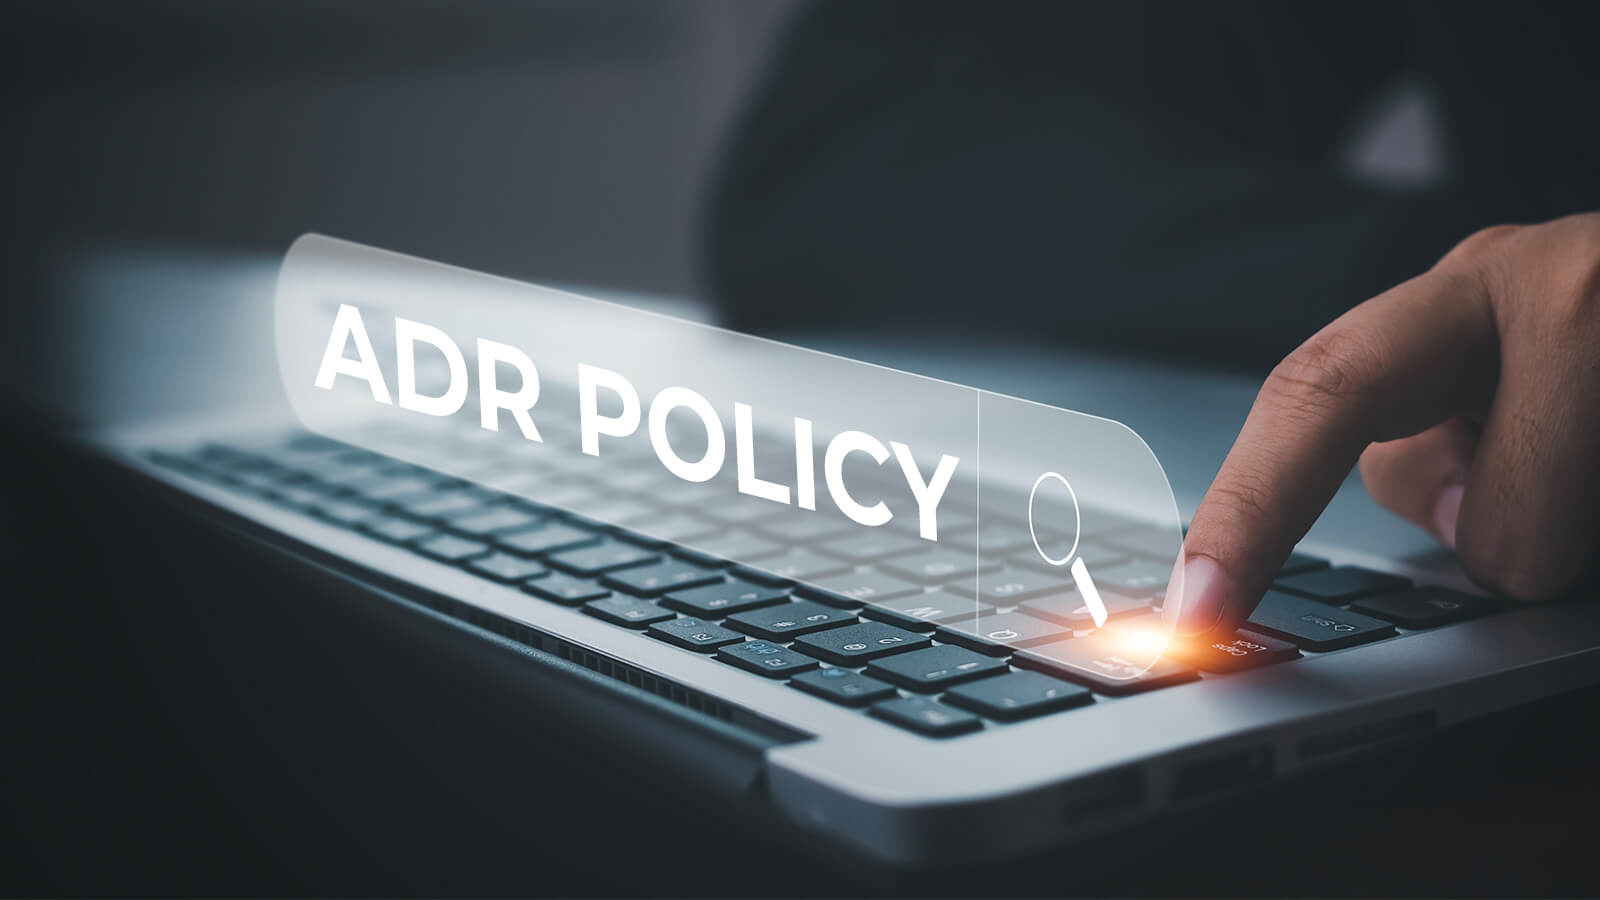 Why You Also Should Check the ADR Policy